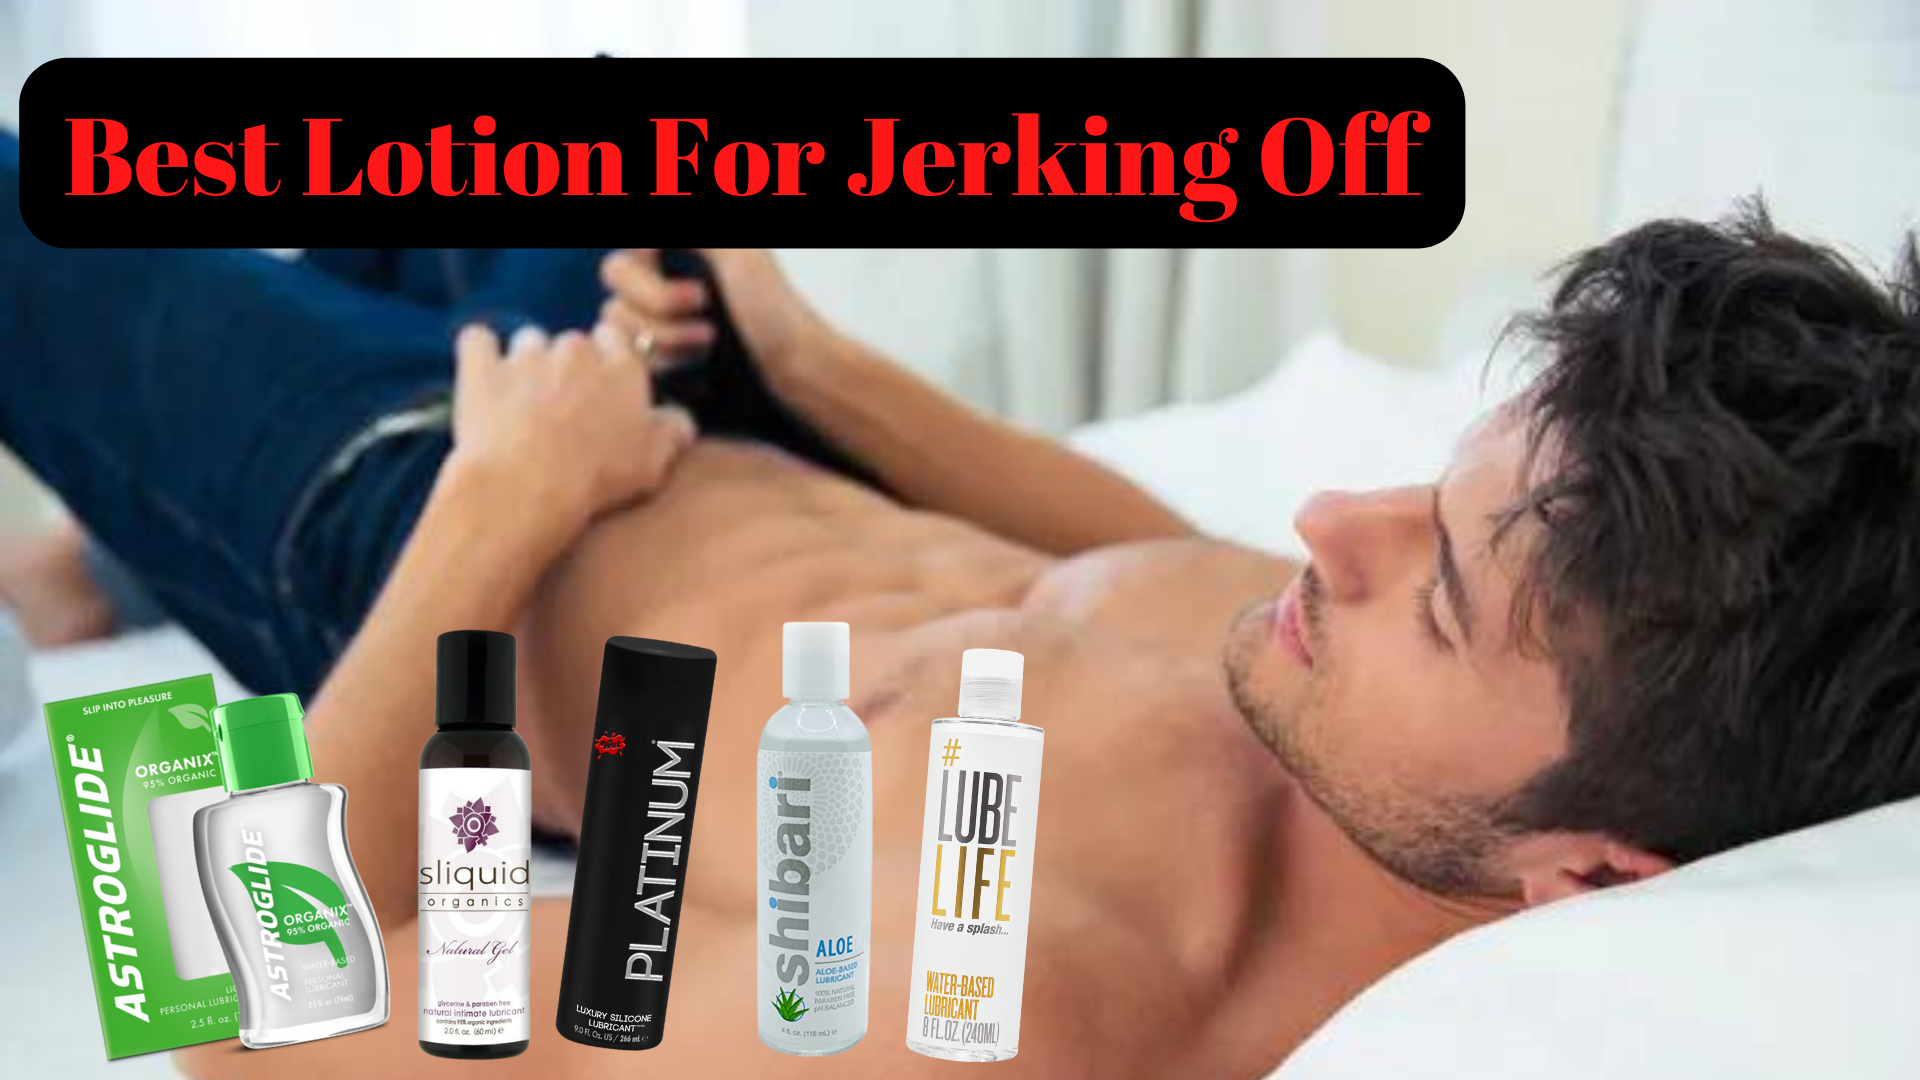 andy hamzah recommends good lotion for masturbation pic